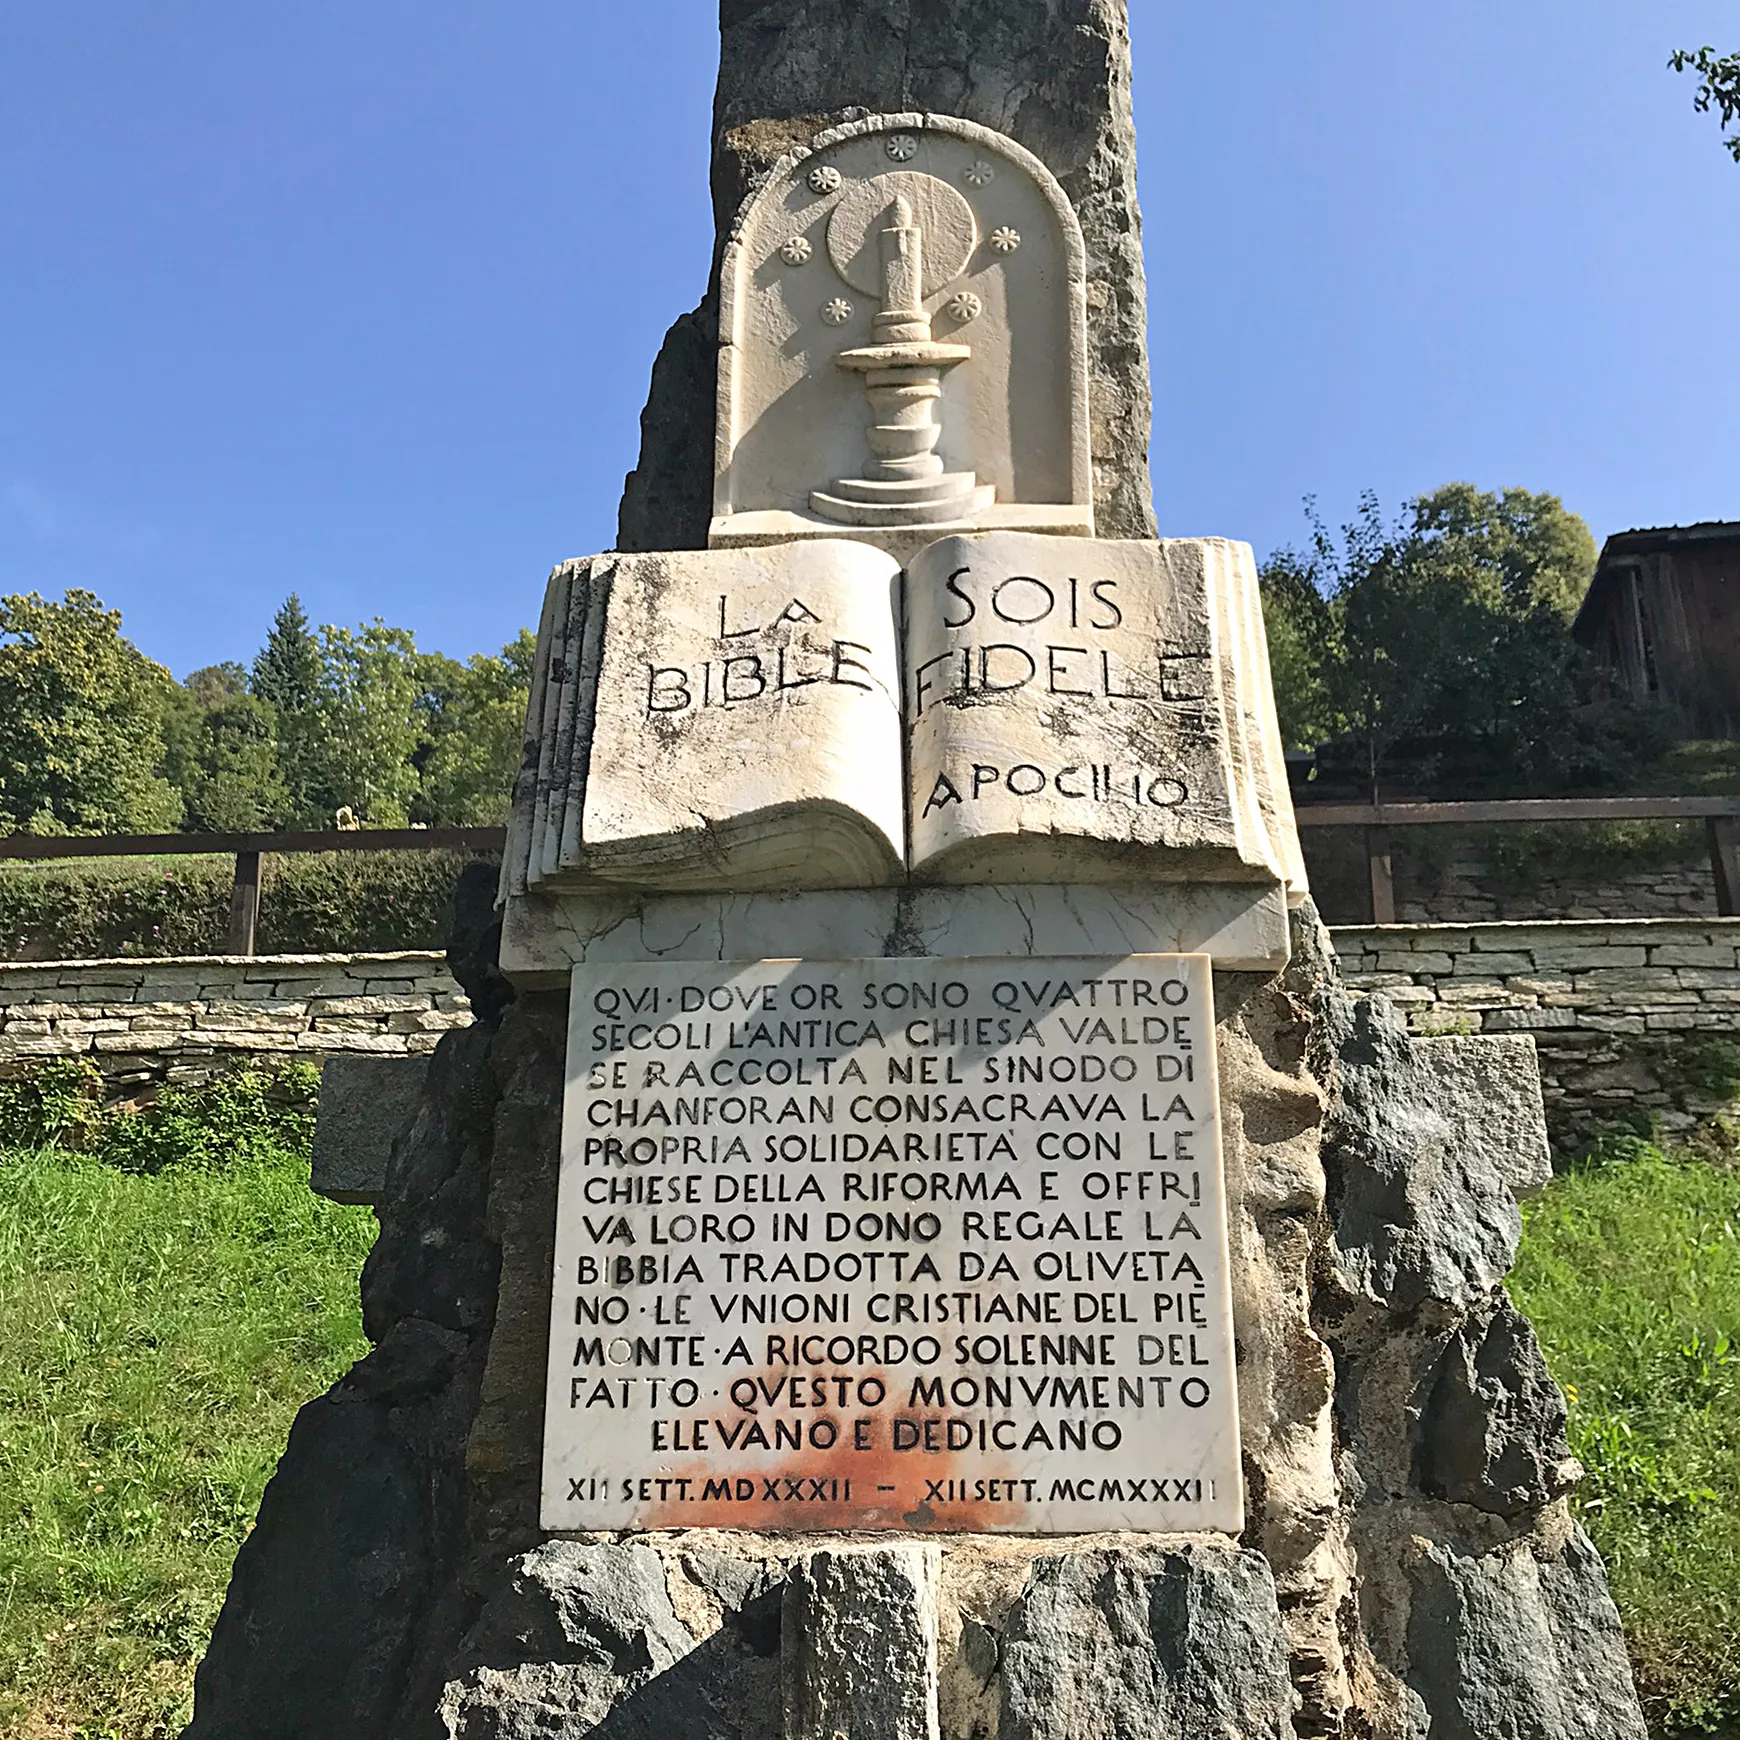 Photo showing: Memorial of the Chanforan synod of the Waldensian churches in 1532 in Angrogna.